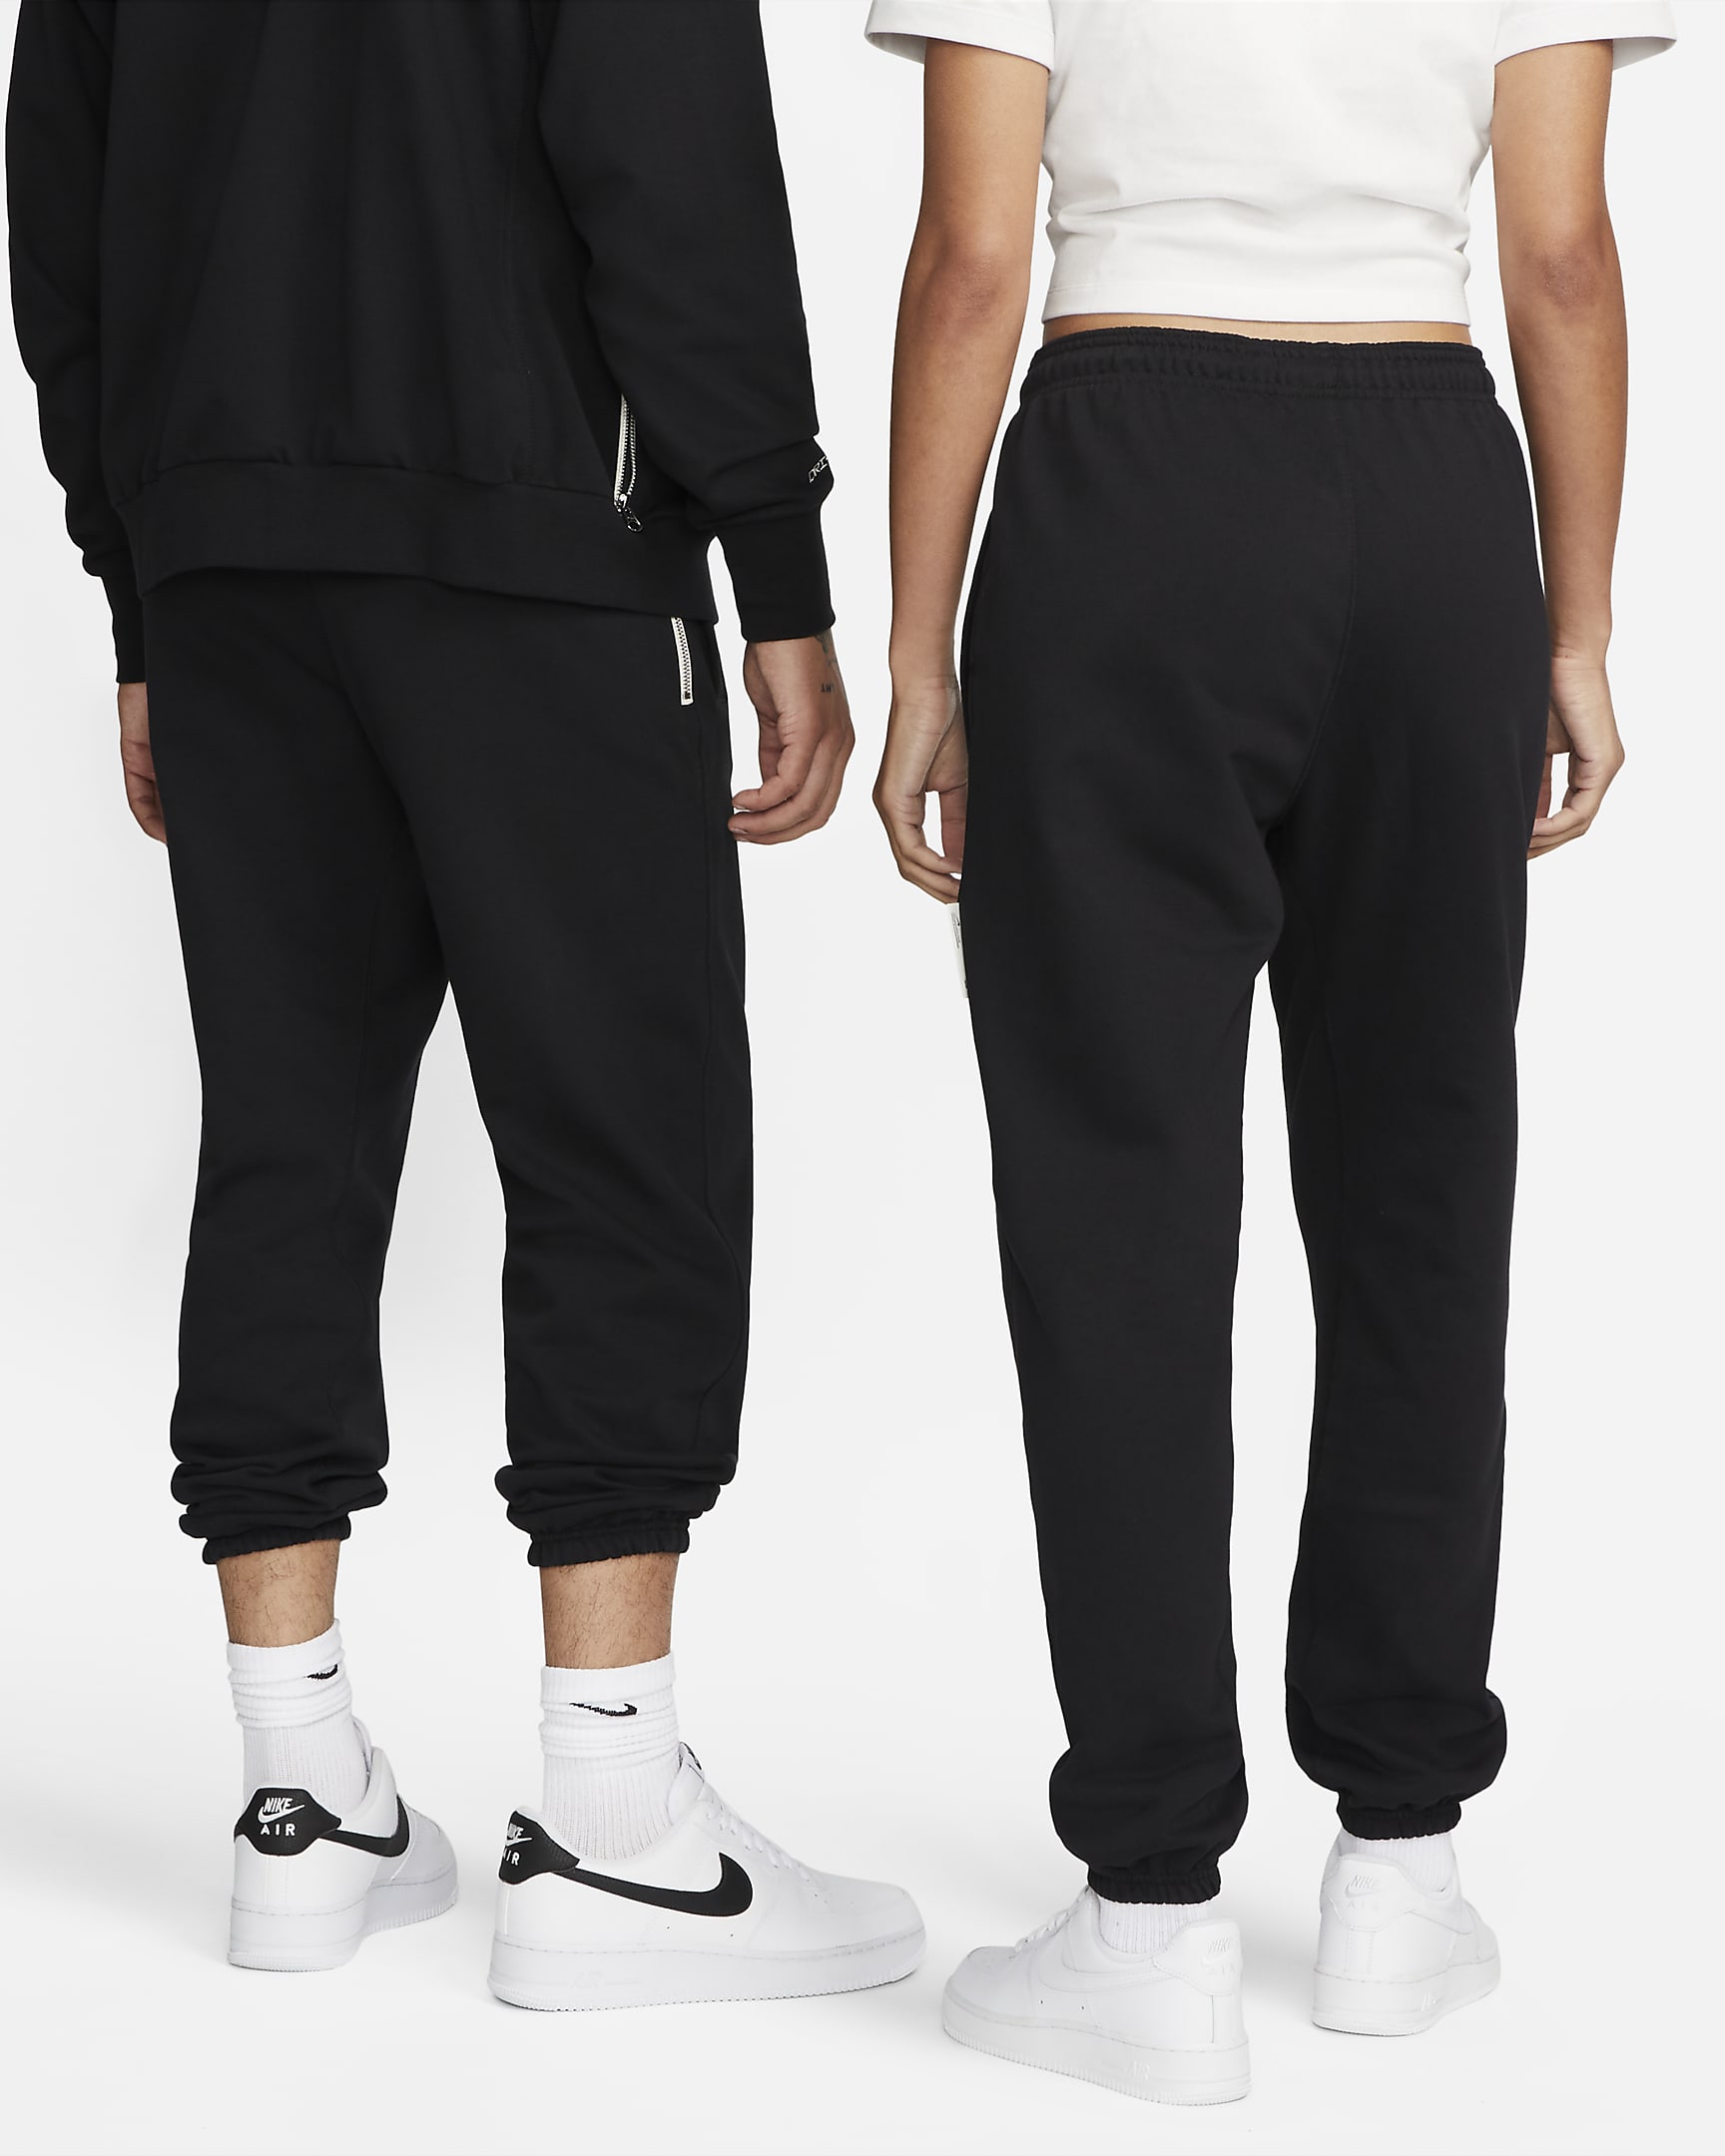 Nike Standard Issue Men's Dri-FIT Basketball Trousers - Black/Pale Ivory